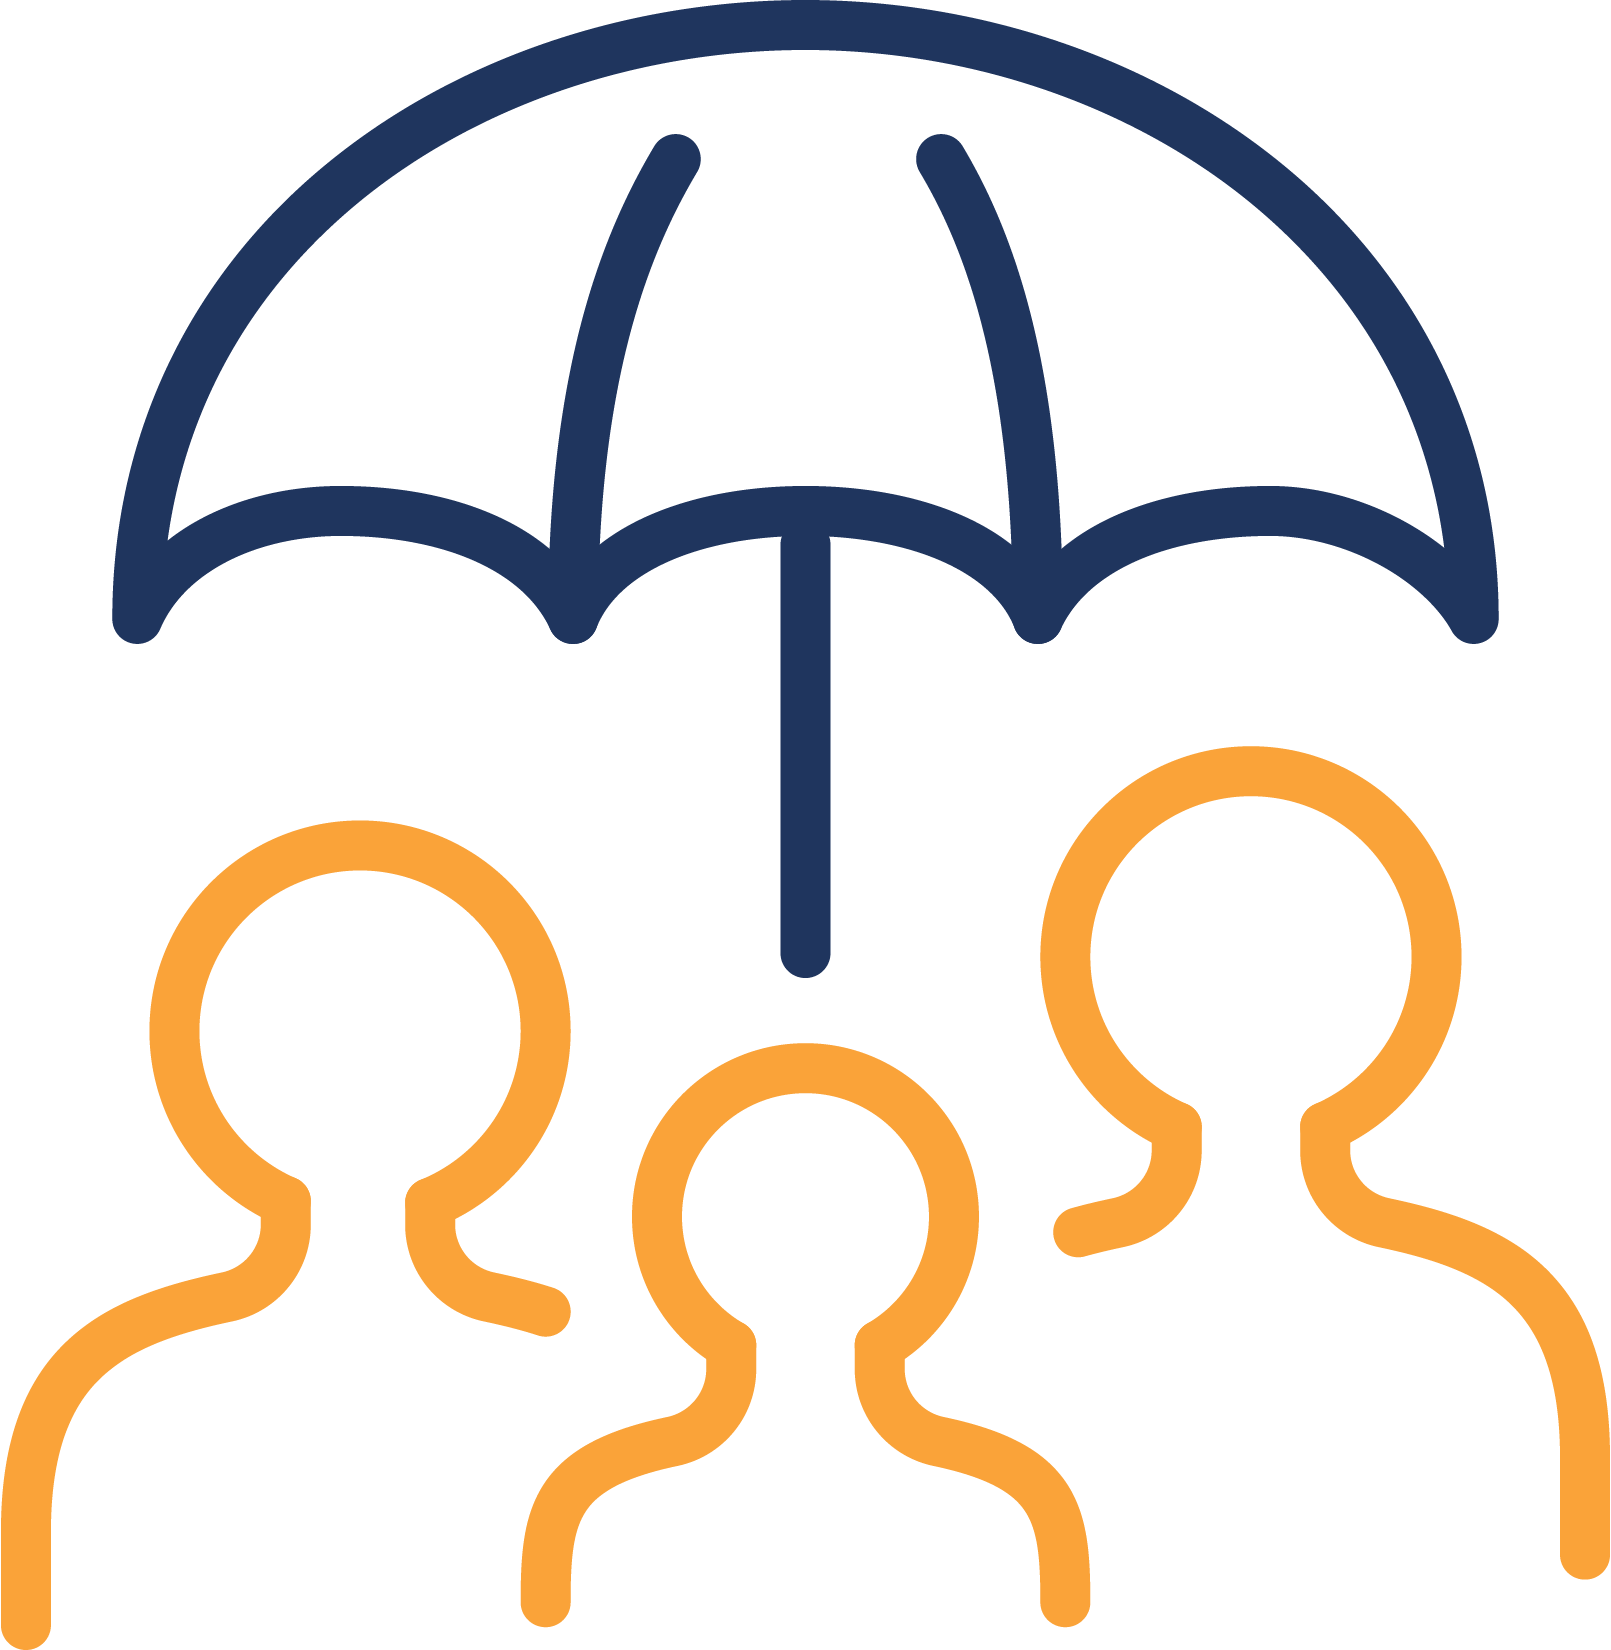 Icon of an umbrella over people